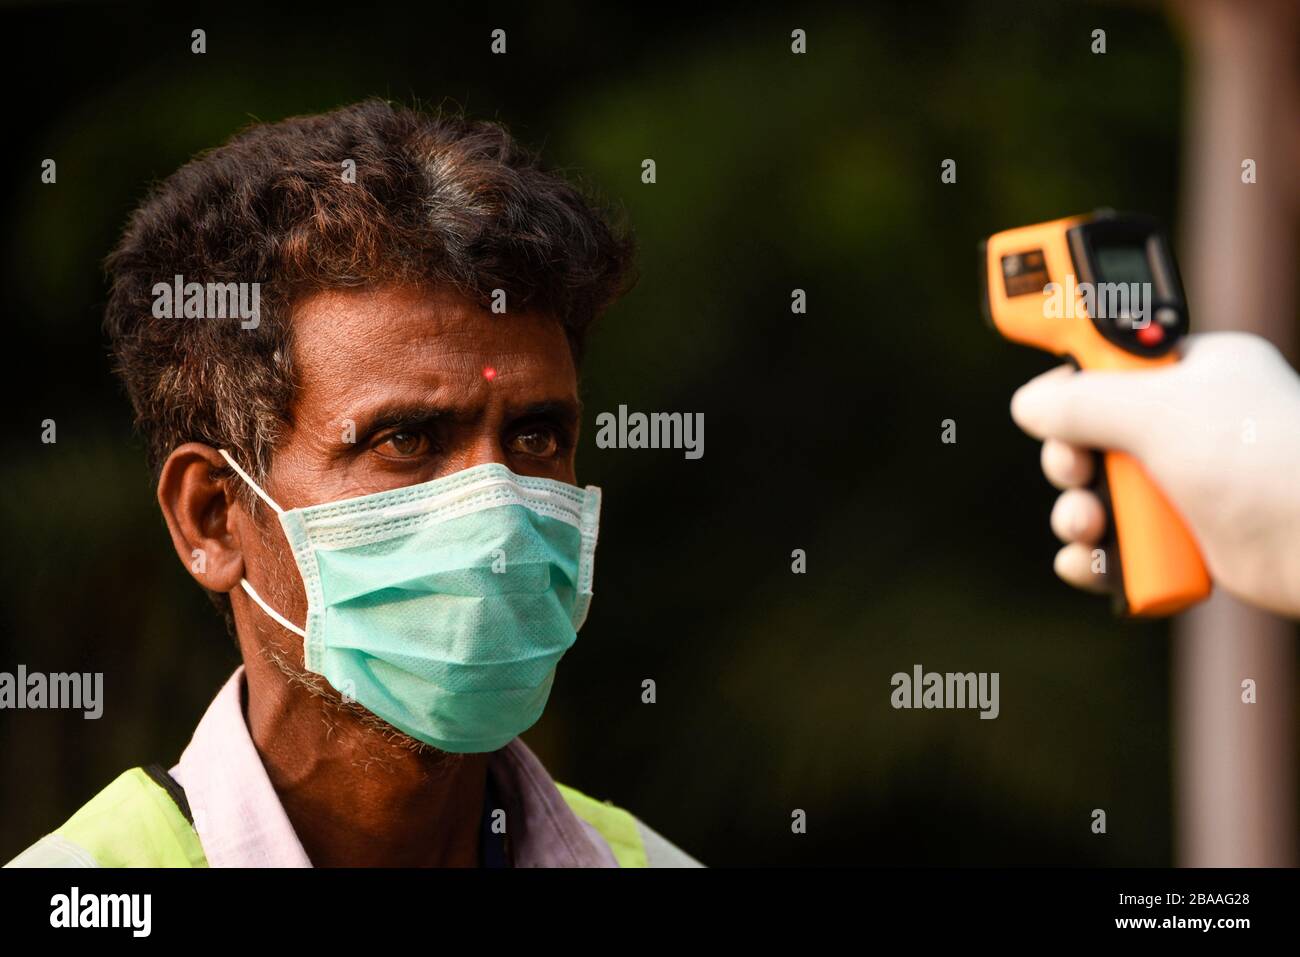 Guwahati, Assam, India. 26th Mar, 2020. Corona Virus emergency in Assam. Guwahati, Assam, India. 26th Mar, 2020. Police personnel thermal screening before entering to the Governor House of Assam, in Guwahati on 26 March, 2020. Credit: David Talukdar/Alamy Live News Credit: David Talukdar/Alamy Live News Stock Photo